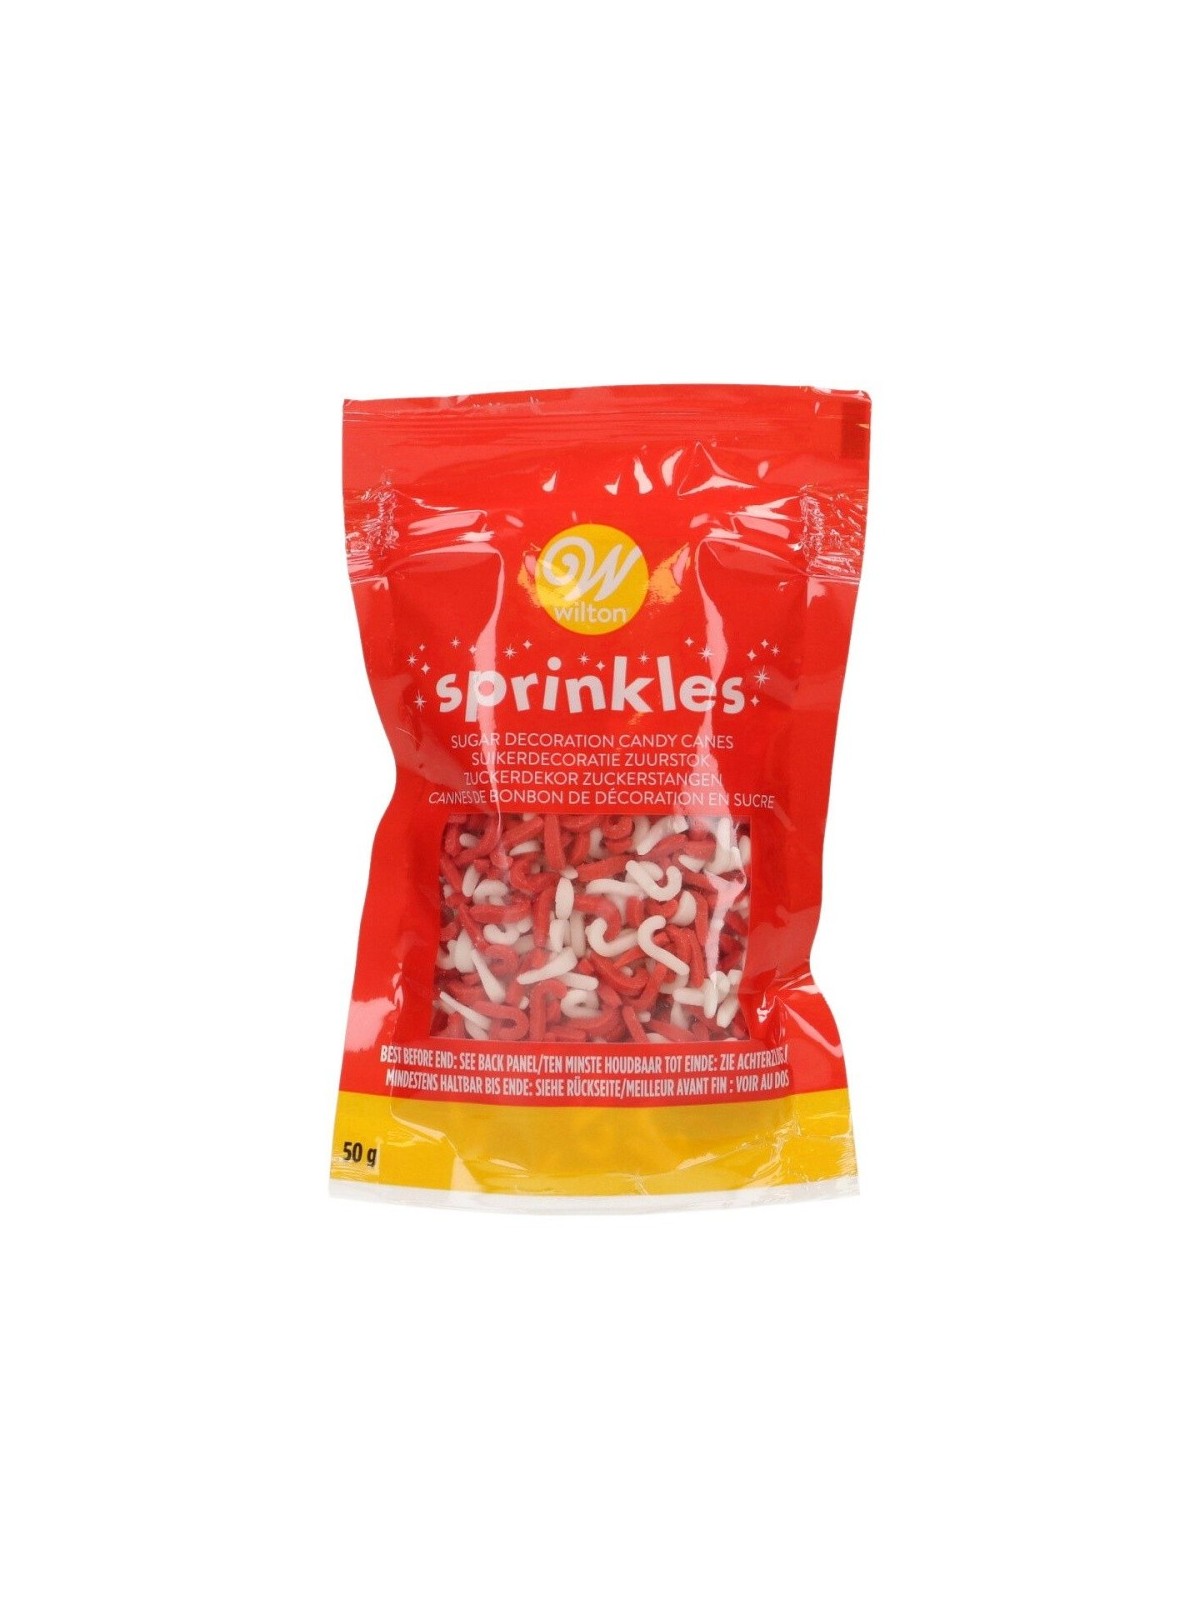 Wilton Sprinkles Candy Cane - 50g